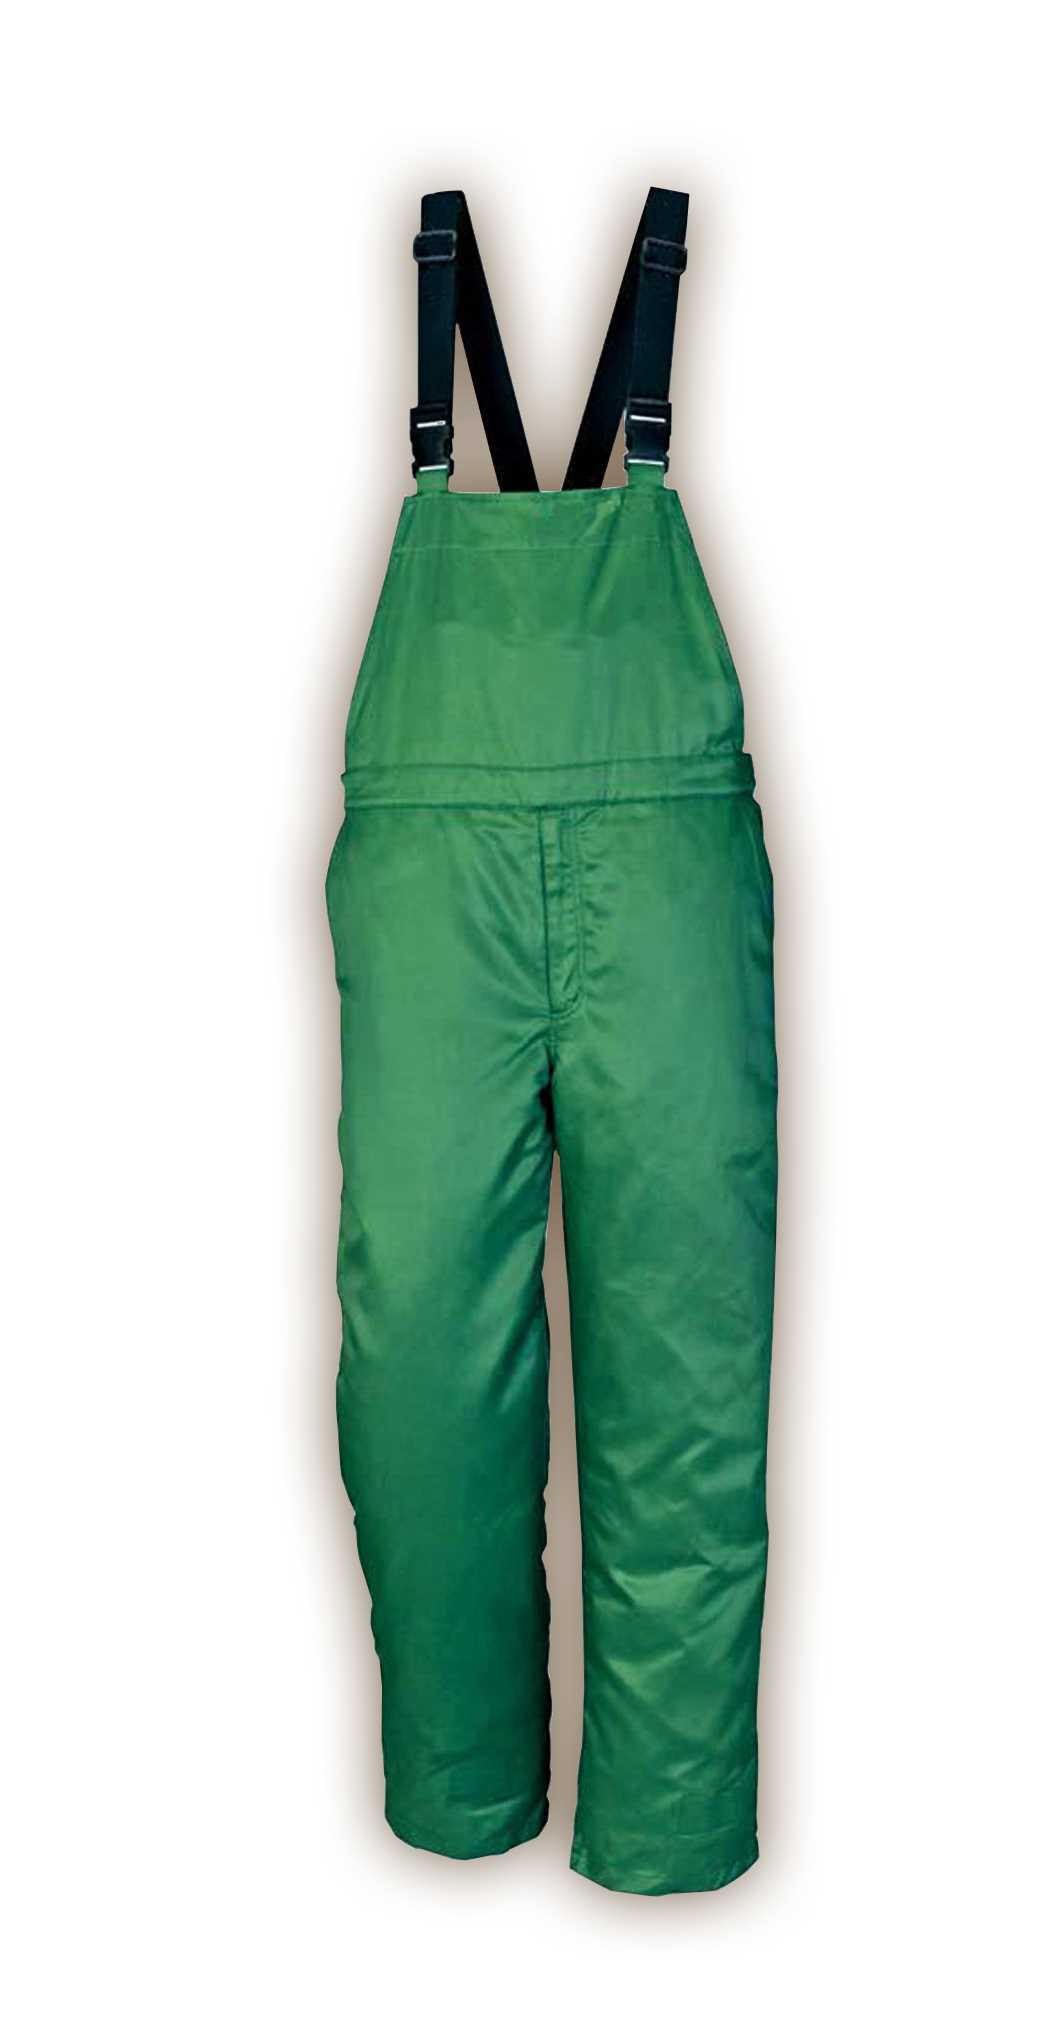 Tongmao Chain Saw Protection Trousers